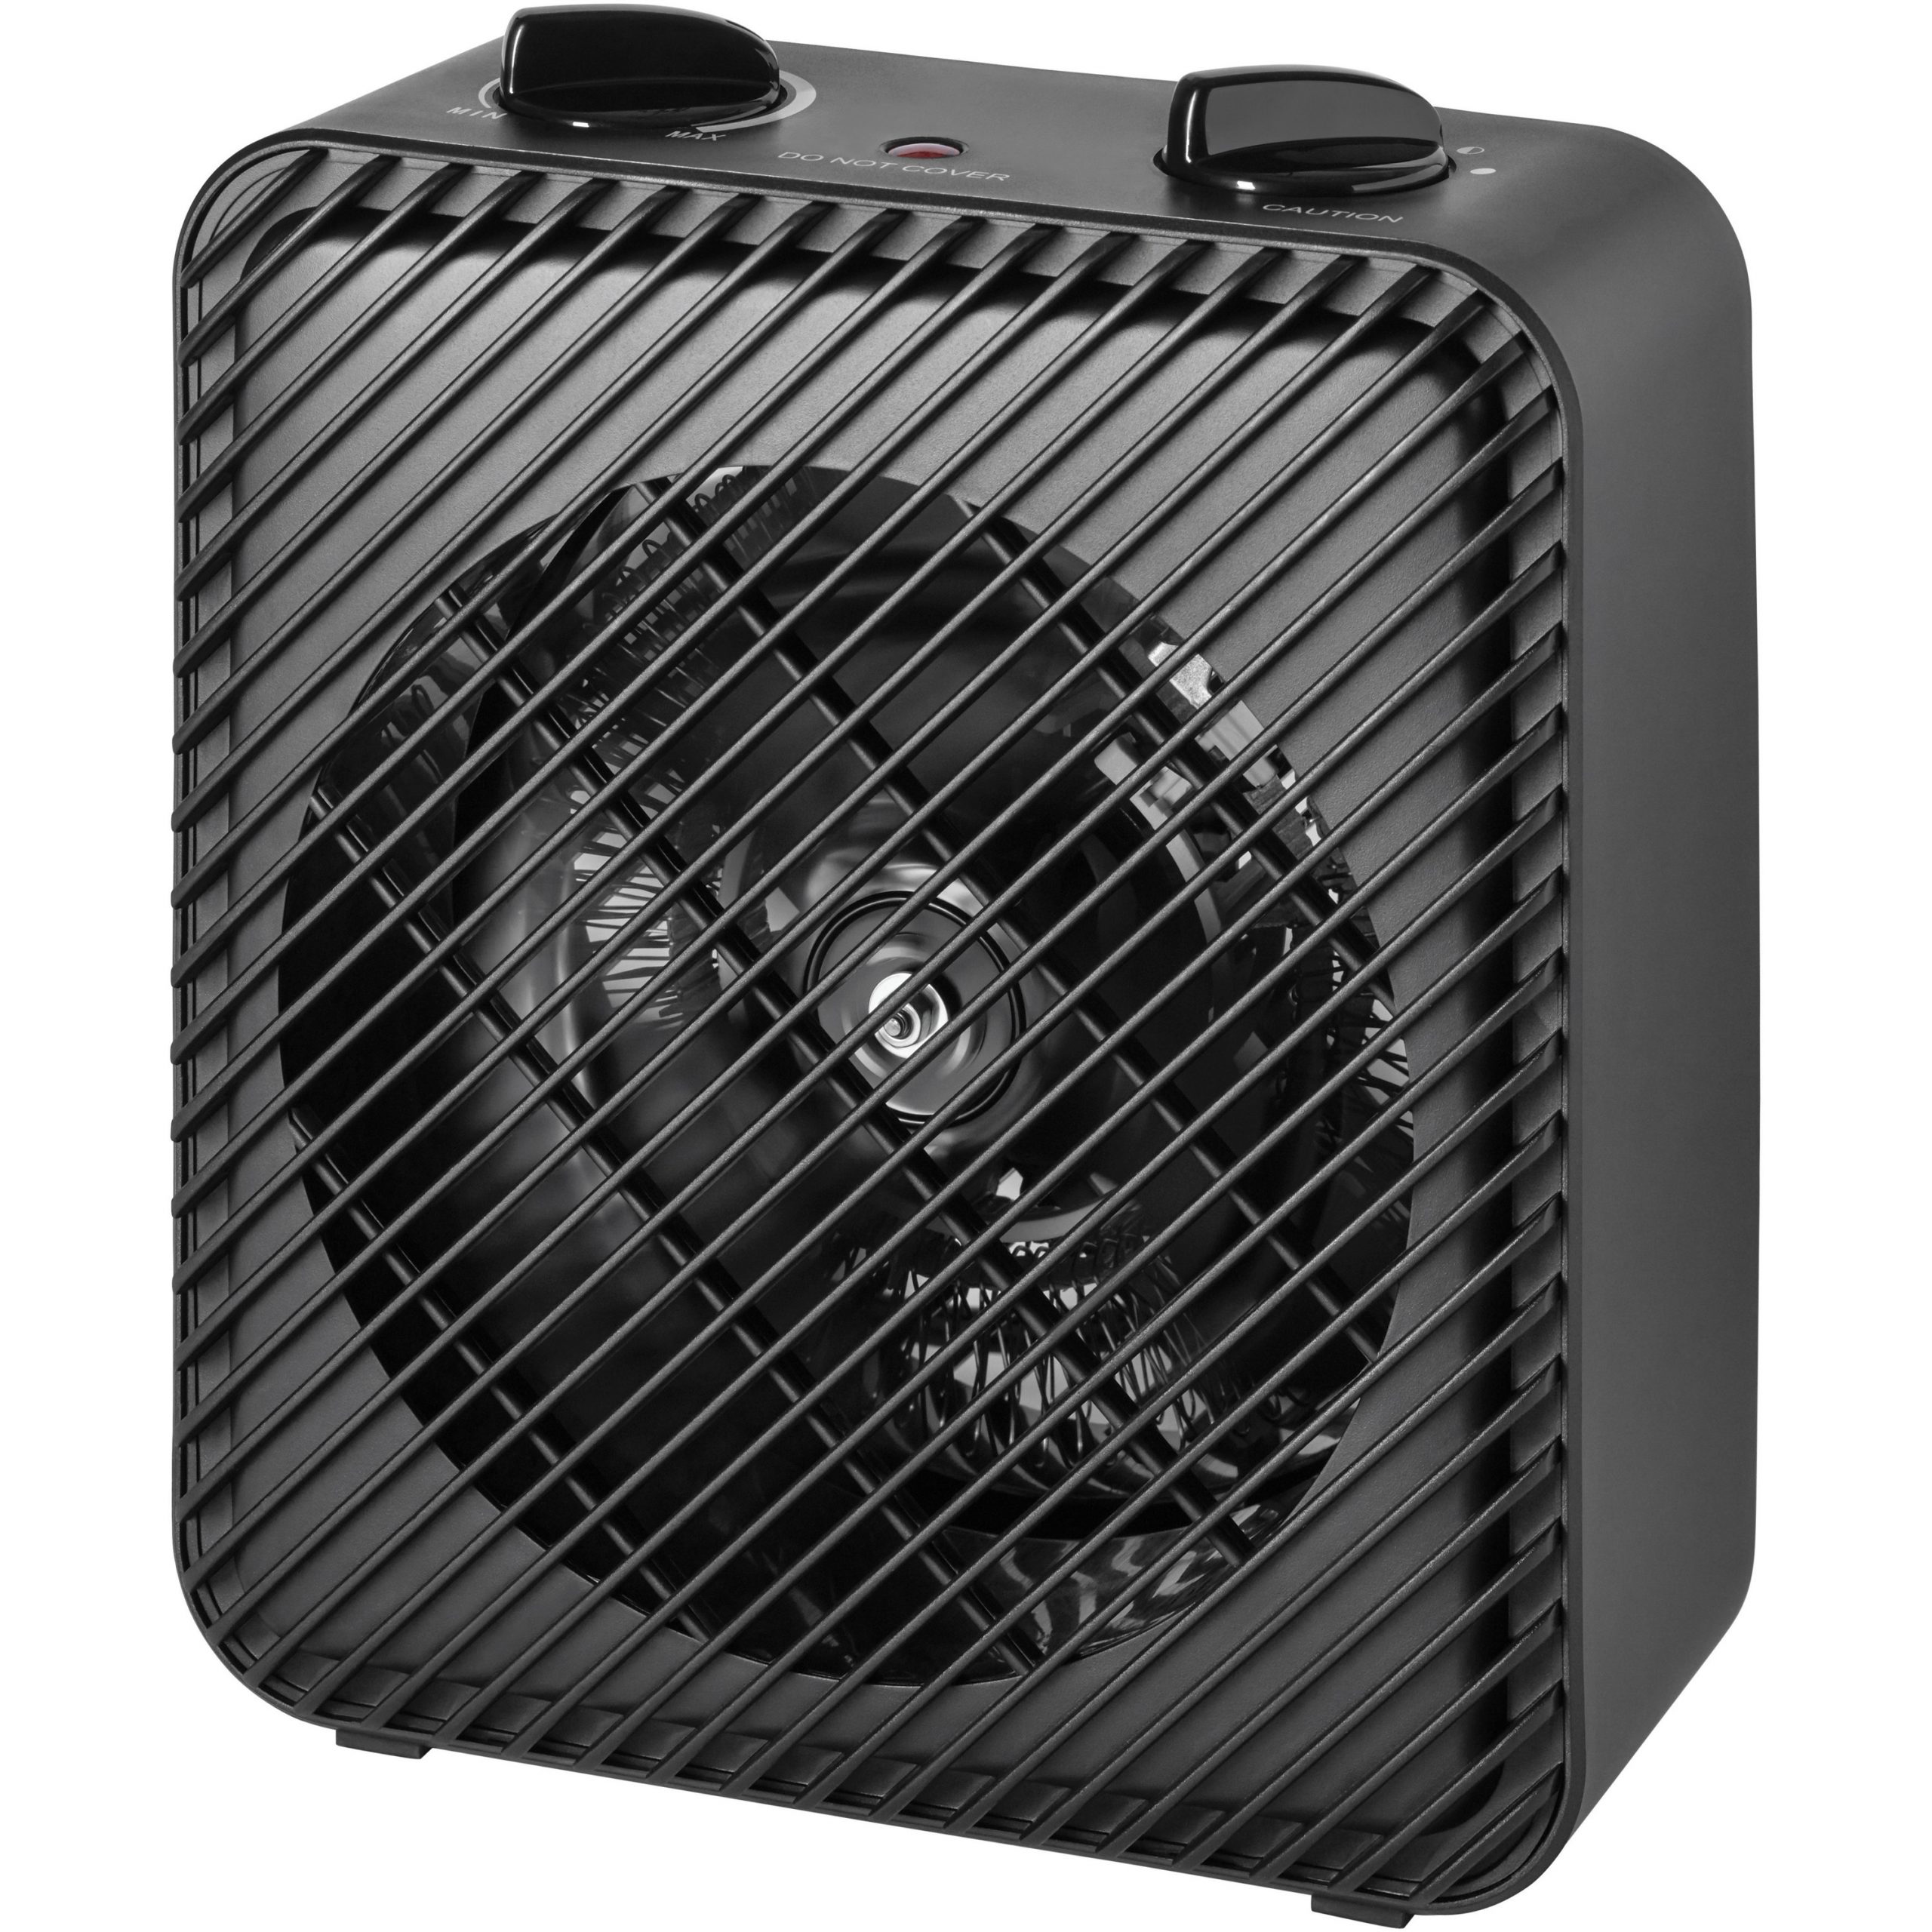 Mainstays Electric Fan Heater Black Hf 1008b intended for proportions 3000 X 3000